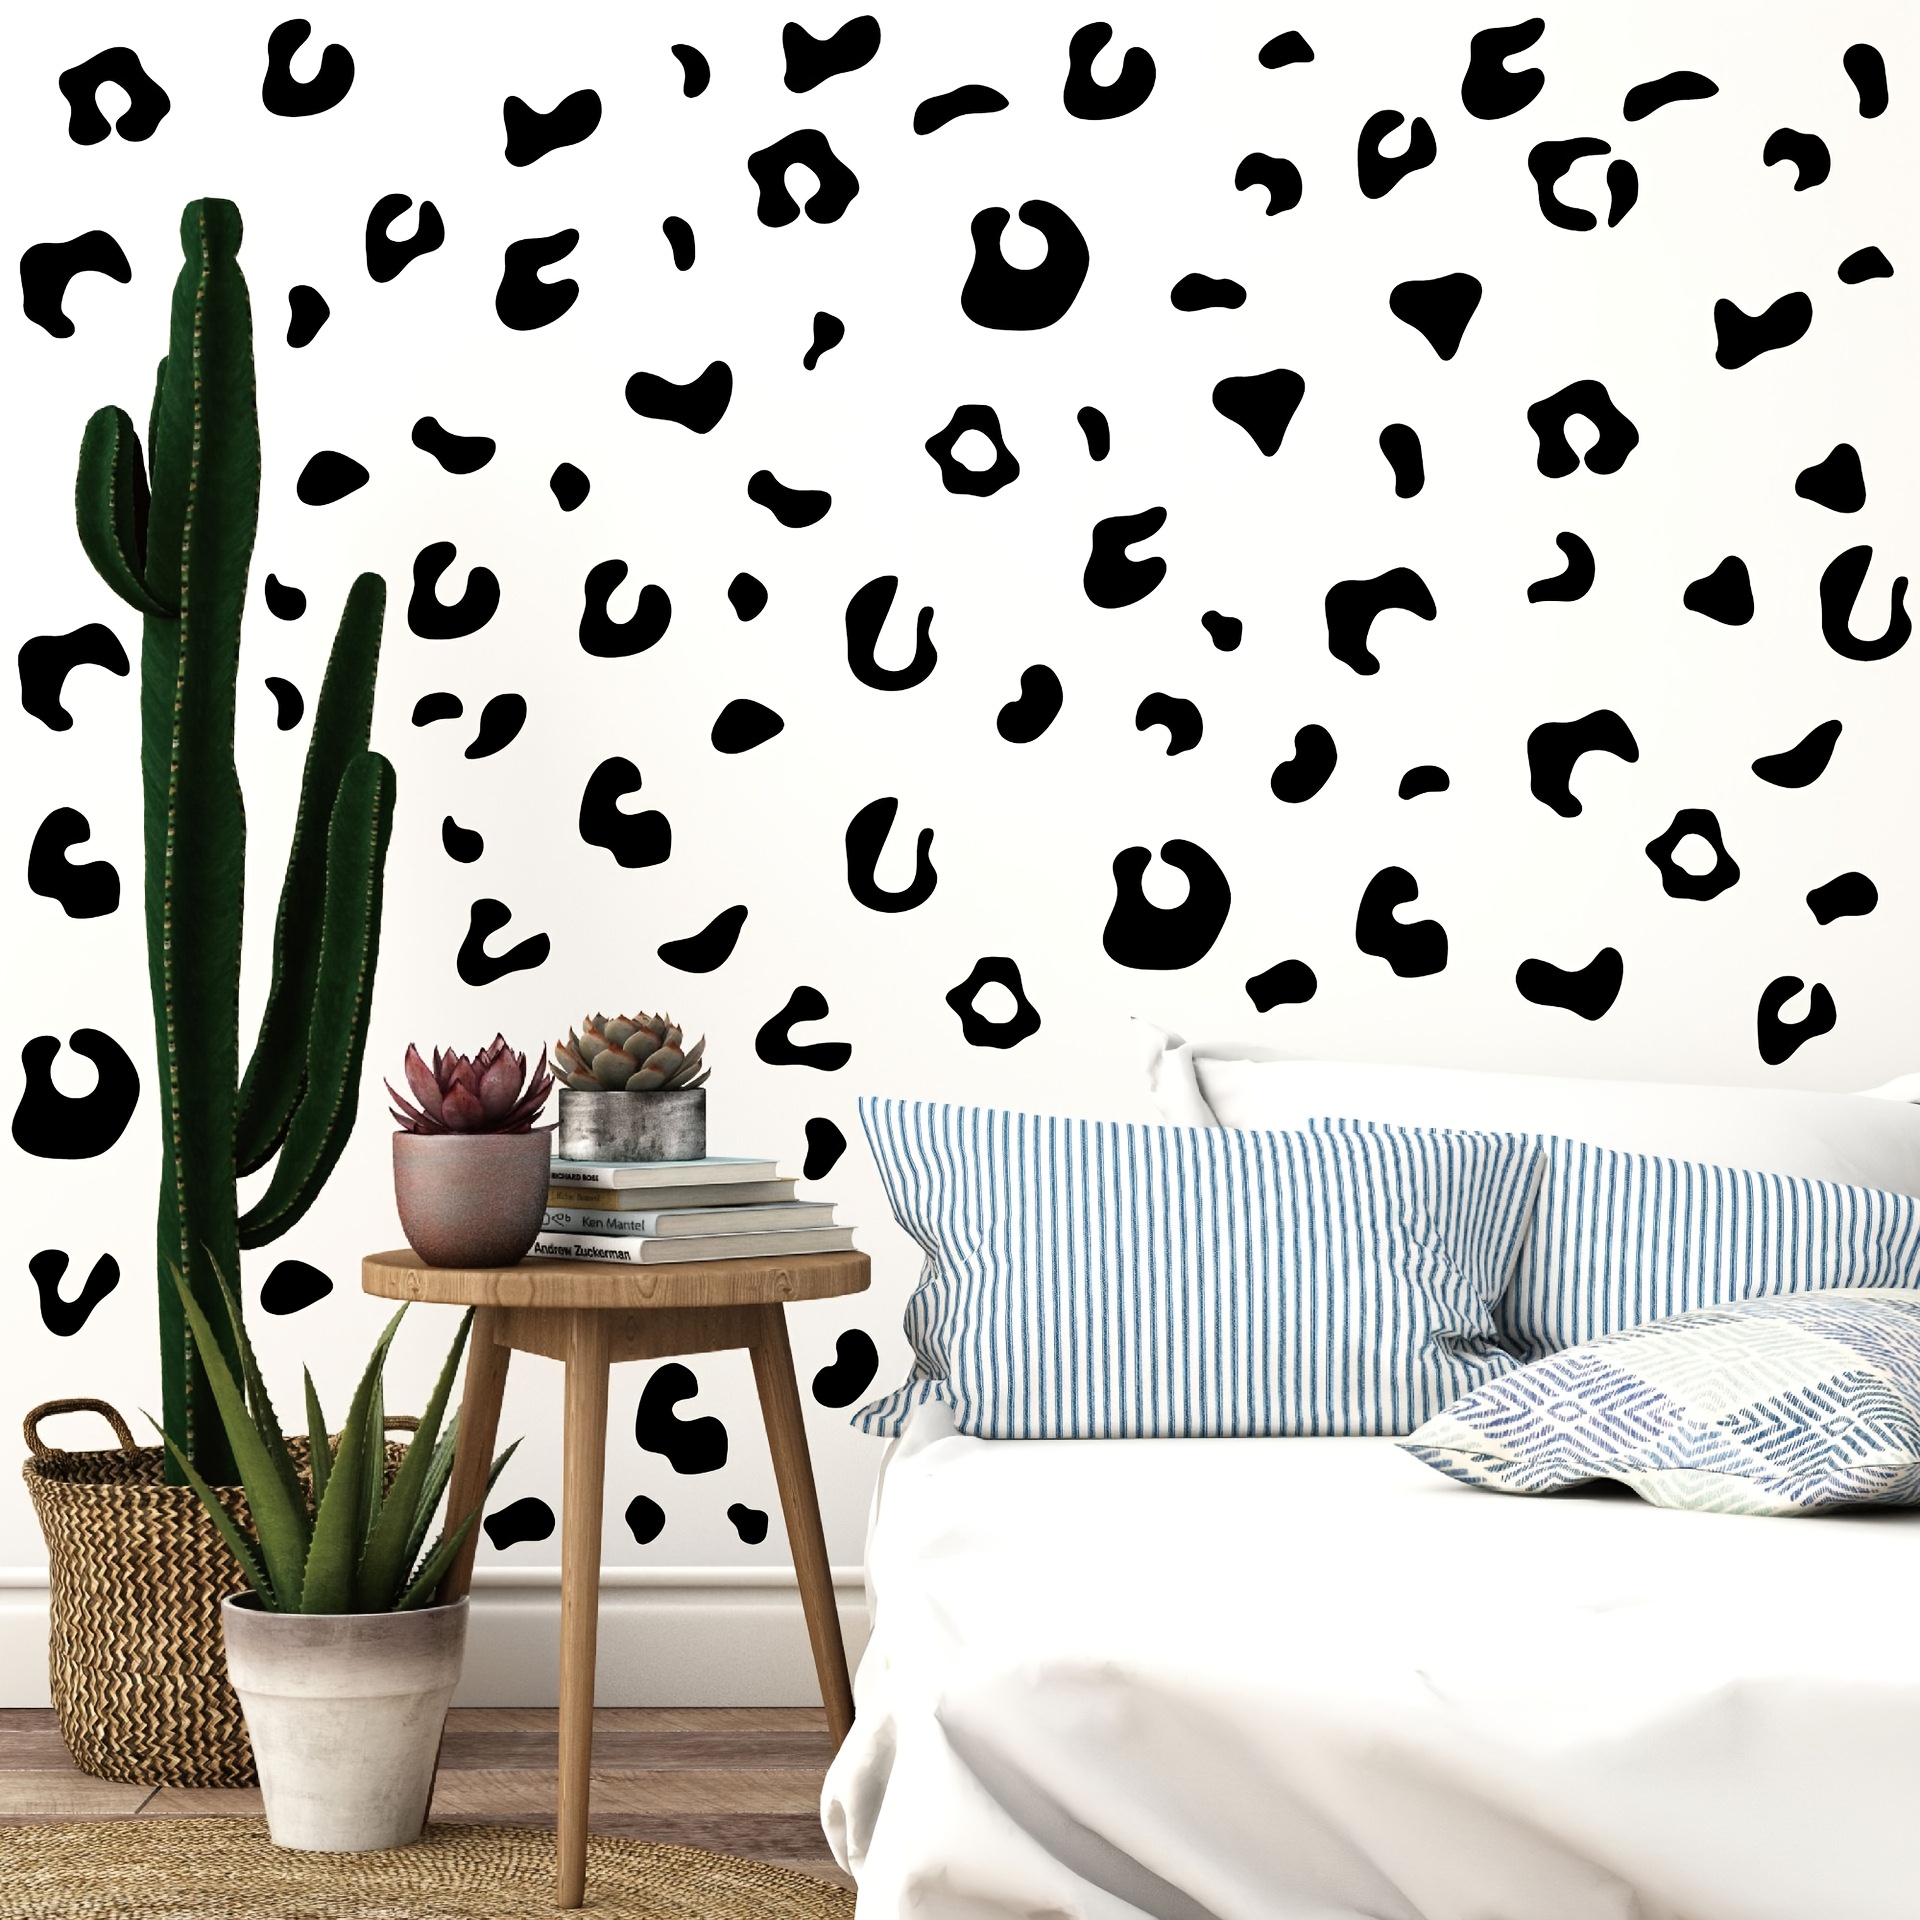 

72pcs Creative Wall Sticker, Leopard Print Irregular Dot Pattern Self-adhesive Wall Stickers, Bedroom Entryway Living Room Porch Home Decoration Wall Stickers, Removable Stickers, Wall Decor Decals